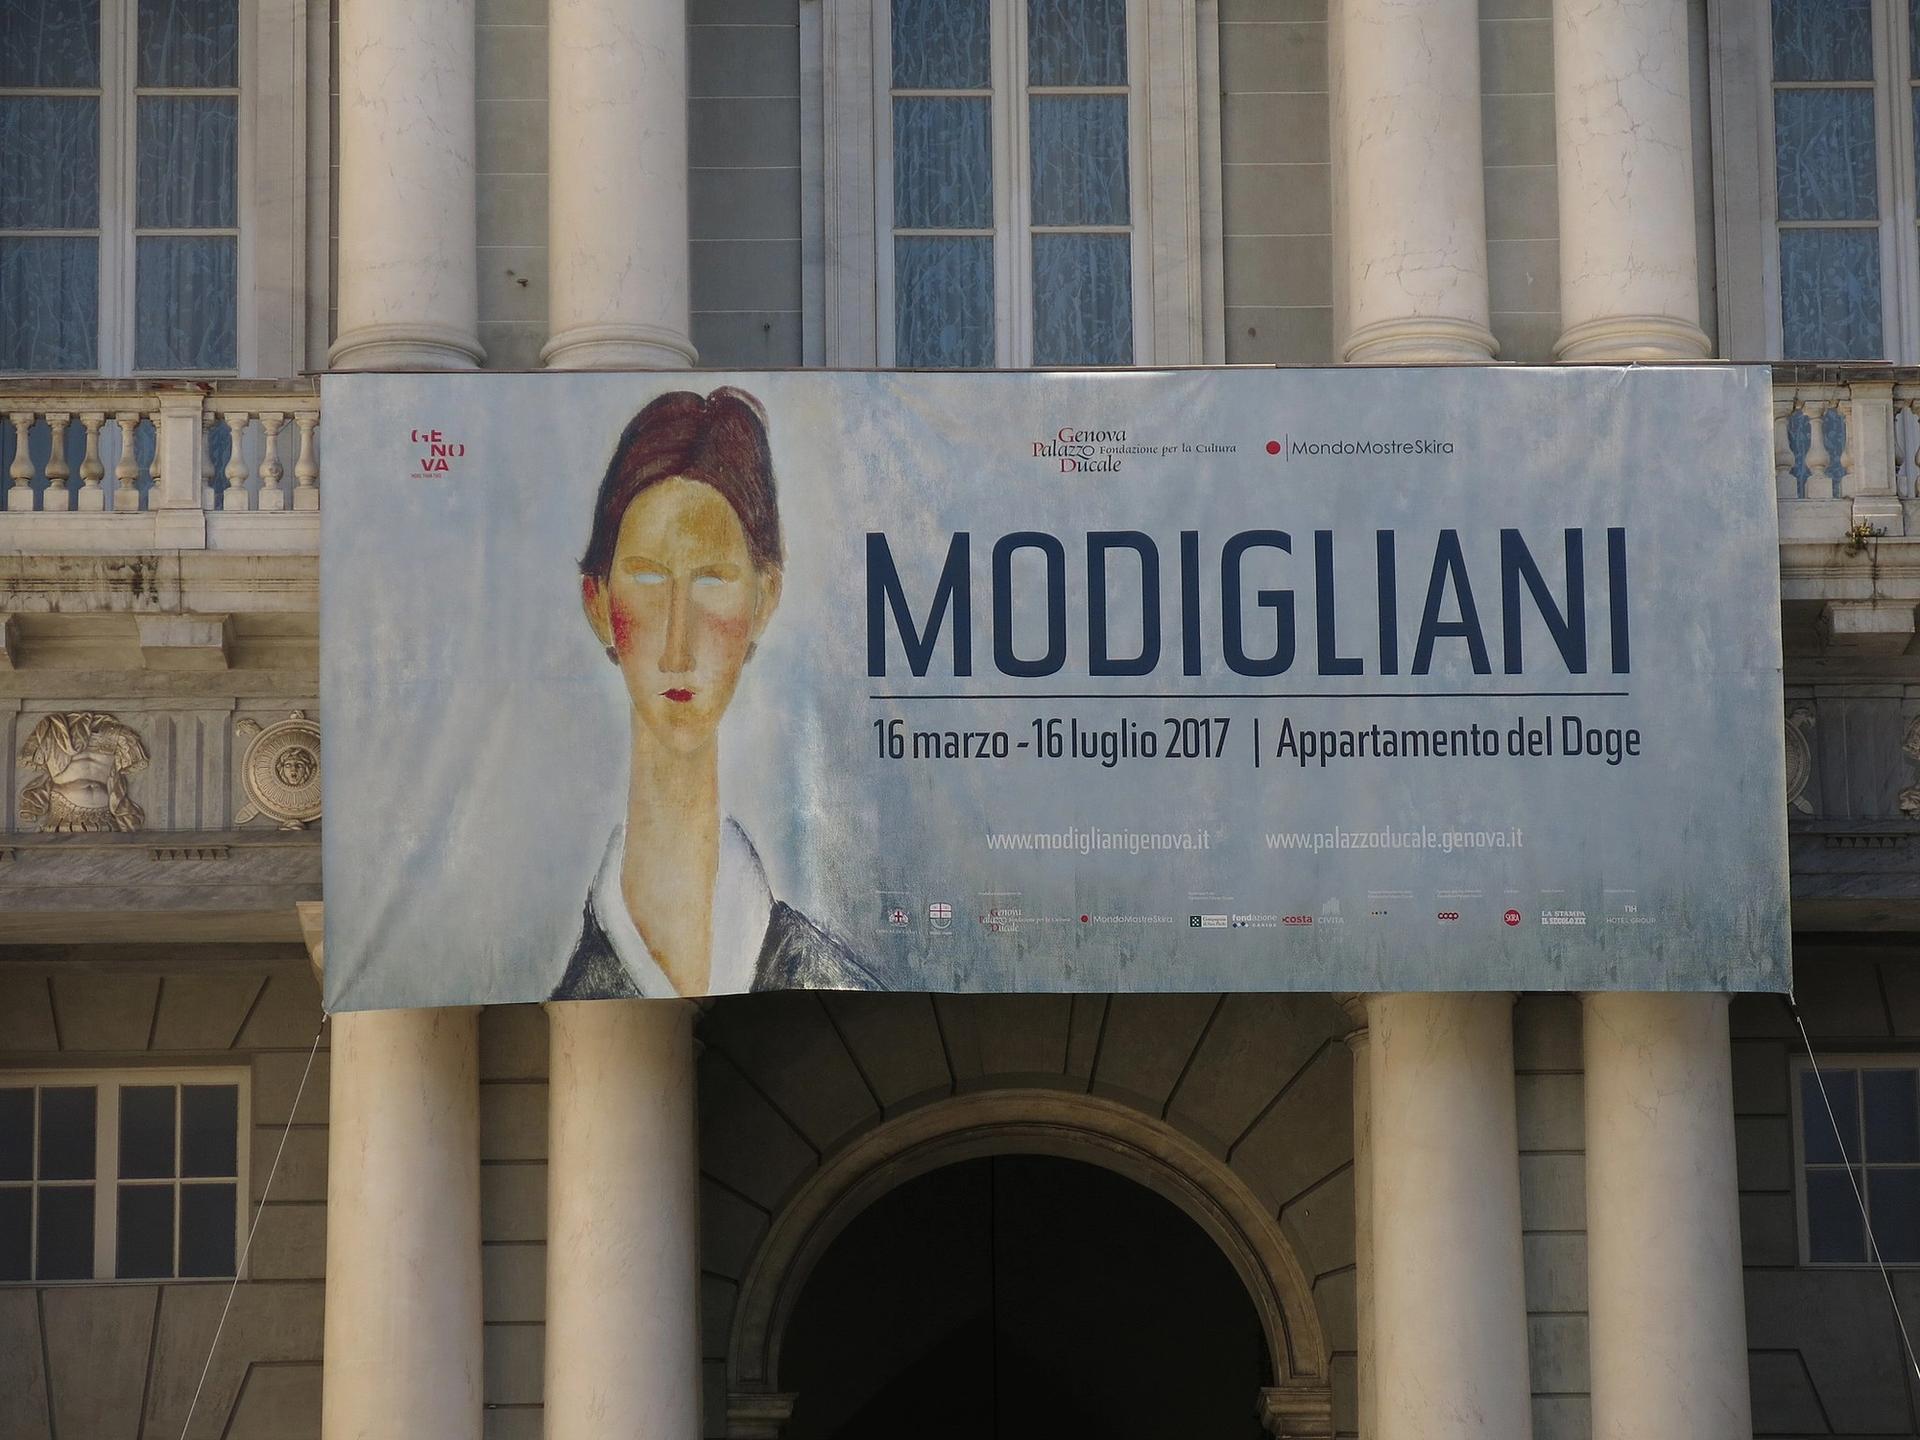 Italian police seized more than 20 paintings from a Modigliani exhibition at Genoa's Palazzo Ducale in 2017. A US dealer says insurers owe him $107m as 12 works he loaned remain in the hands of authorities. Wikimedia Commons/Enric